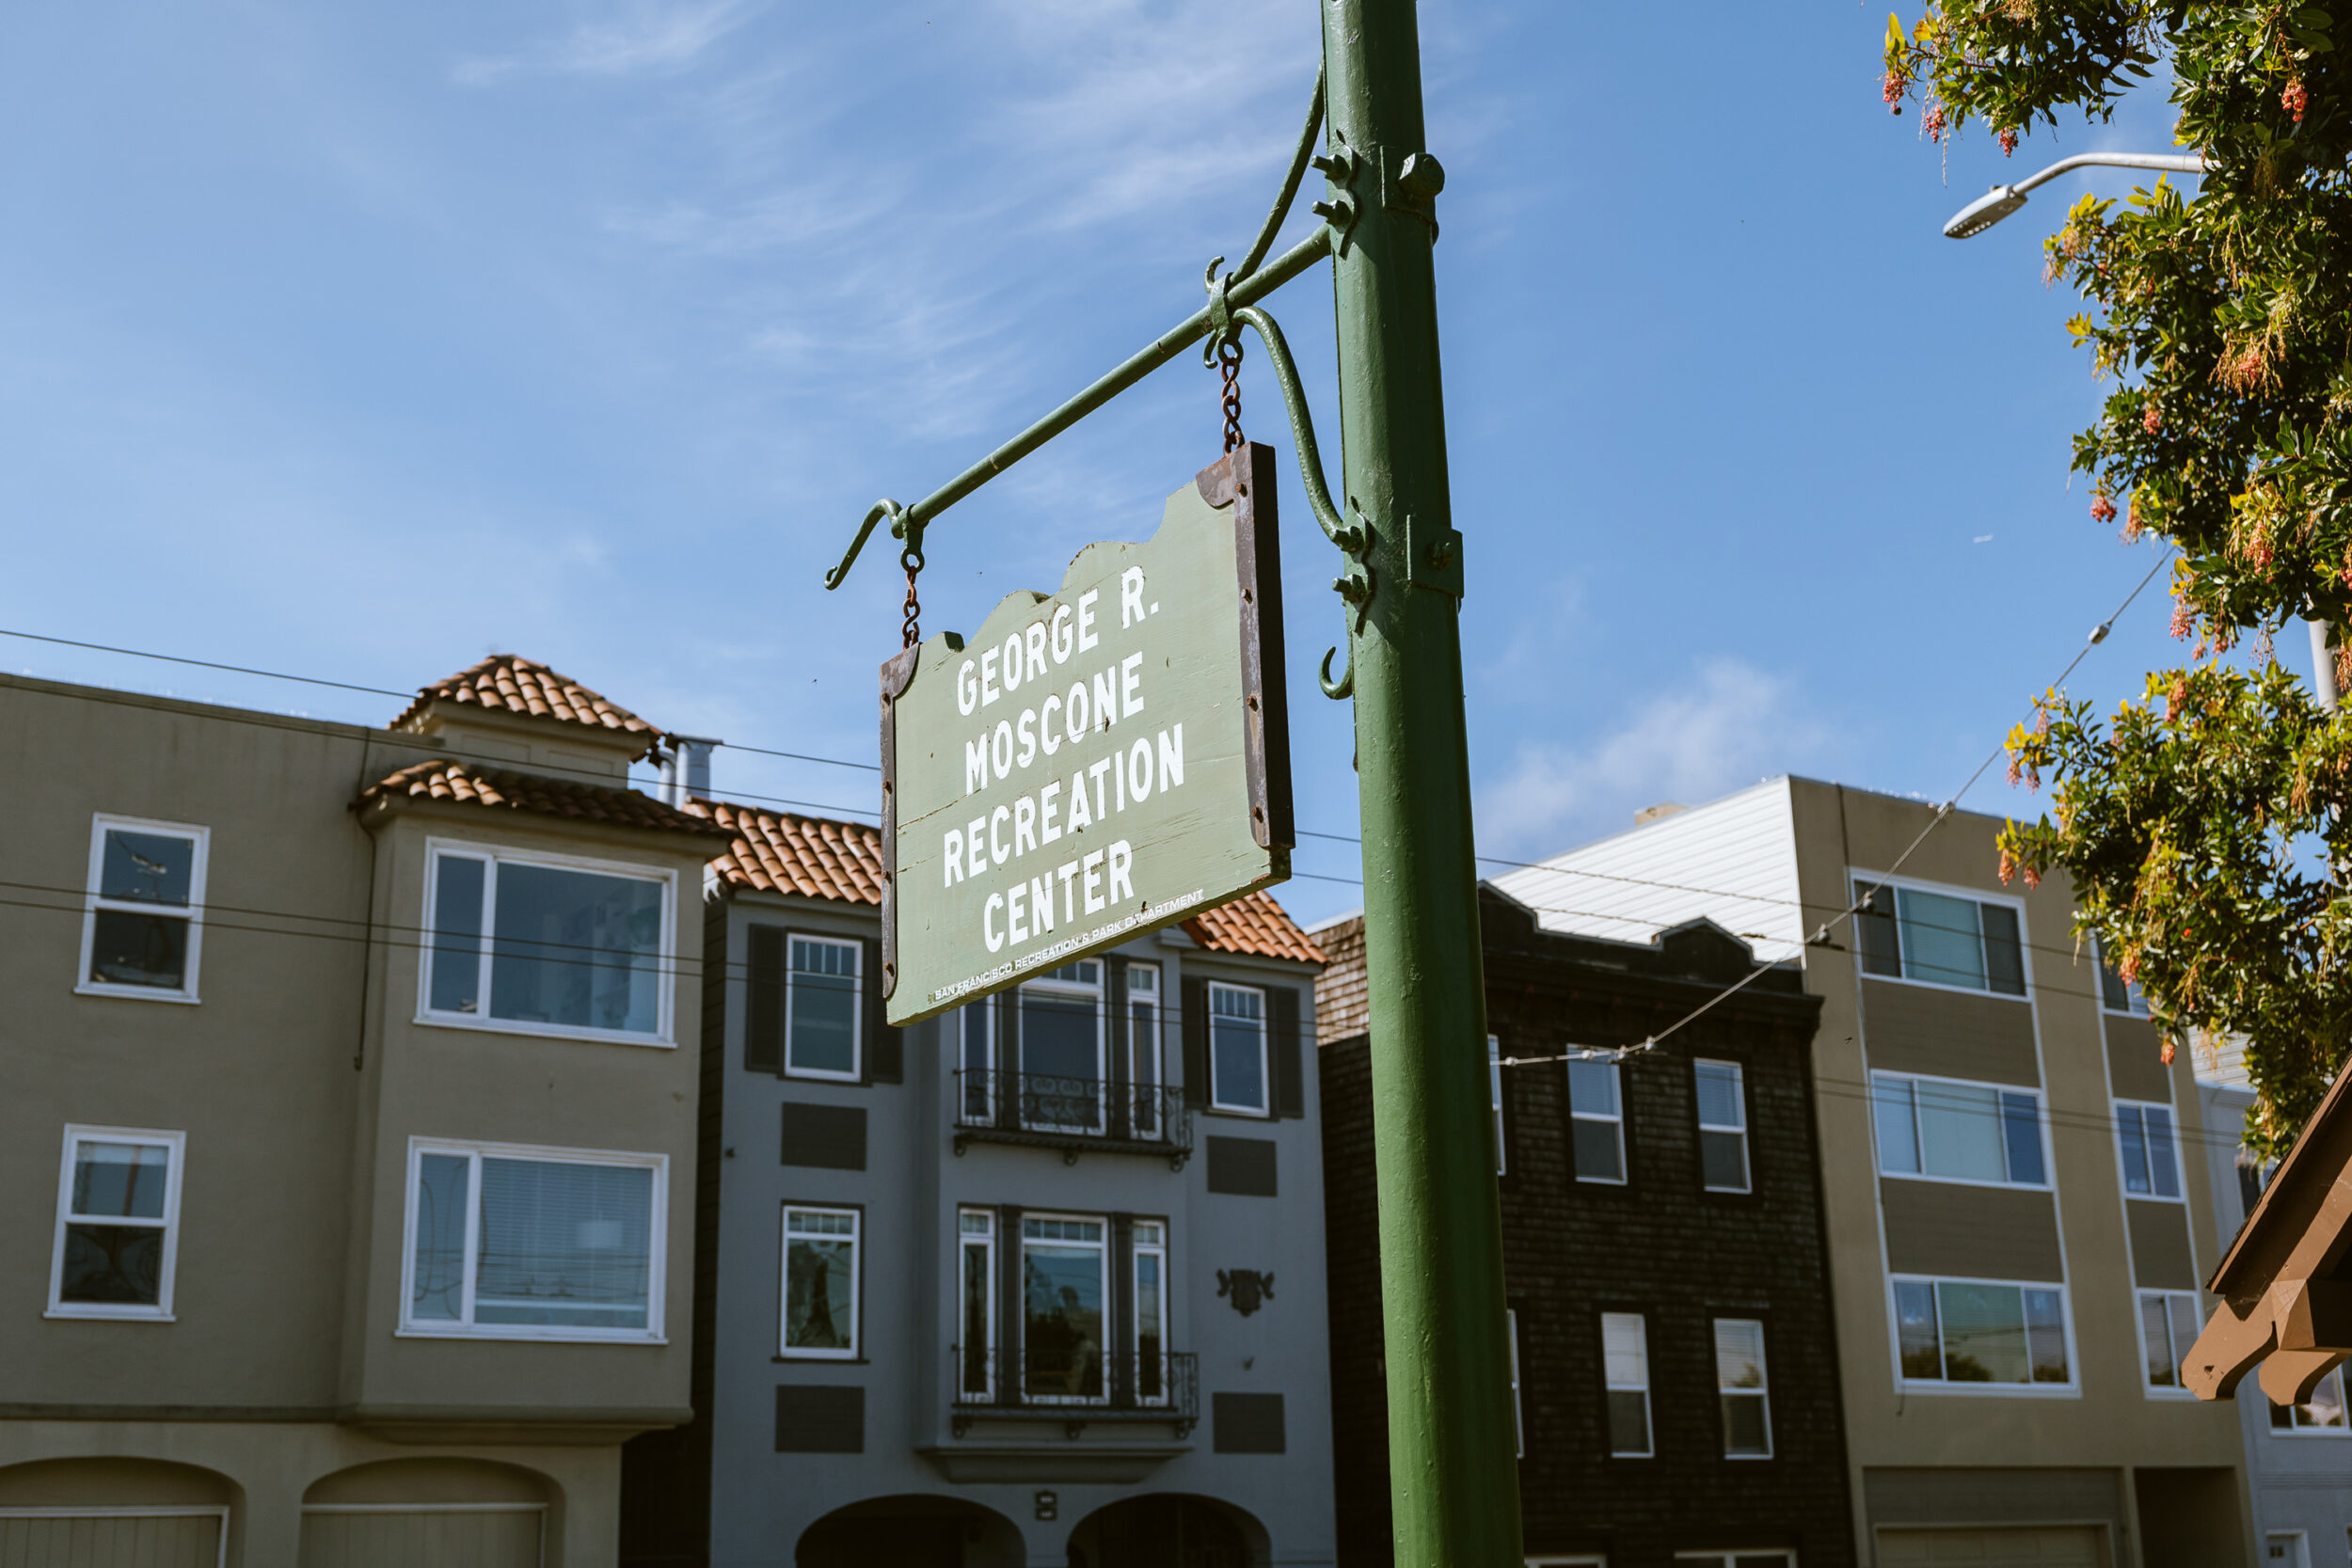 An old, green sign reads &quot;George R. Moscone Recreation Center,&quot; against a backdrop of buildings under a blue sky.